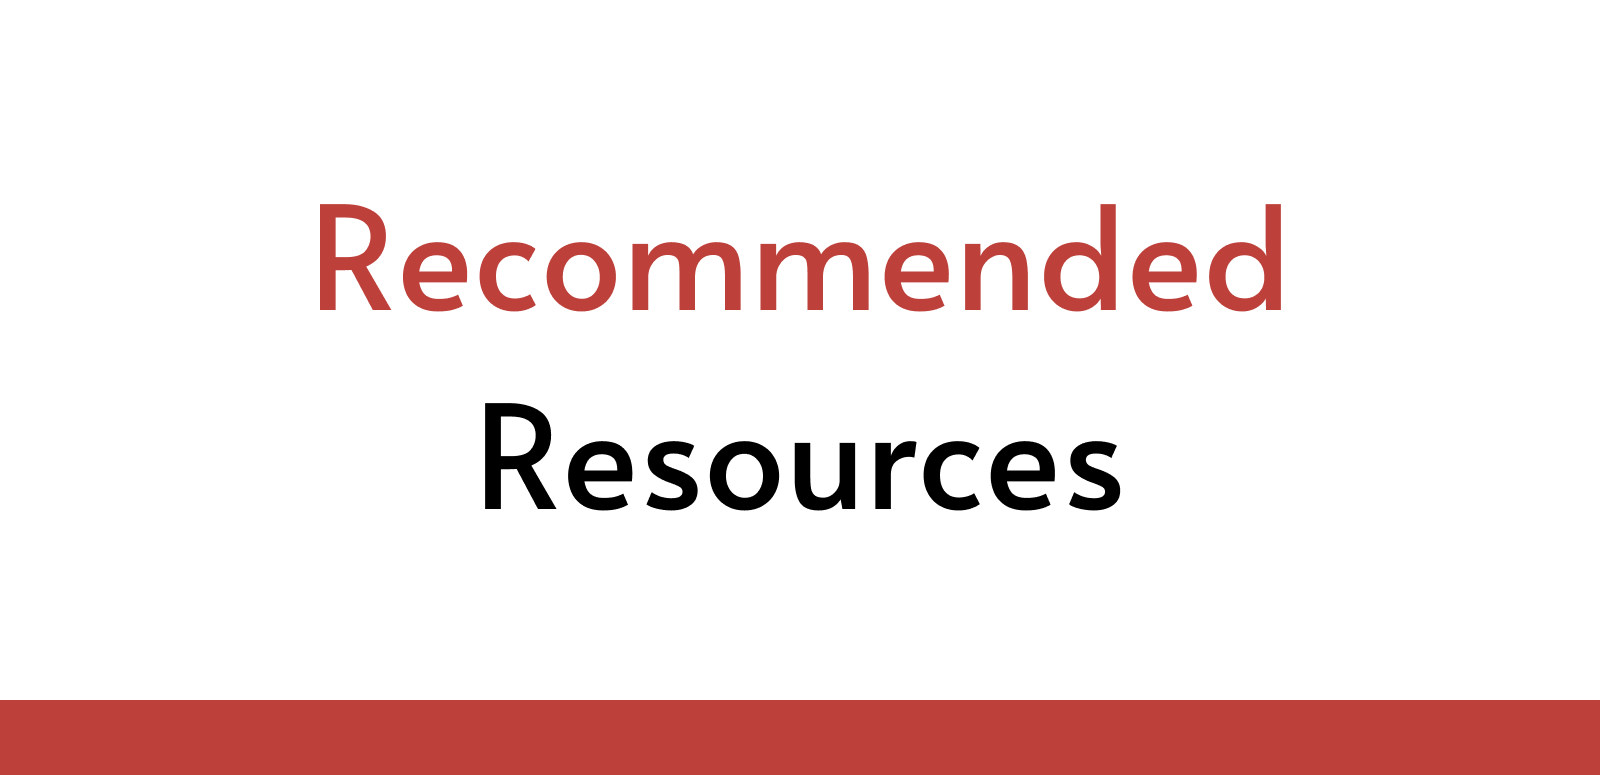 Recommended Resources